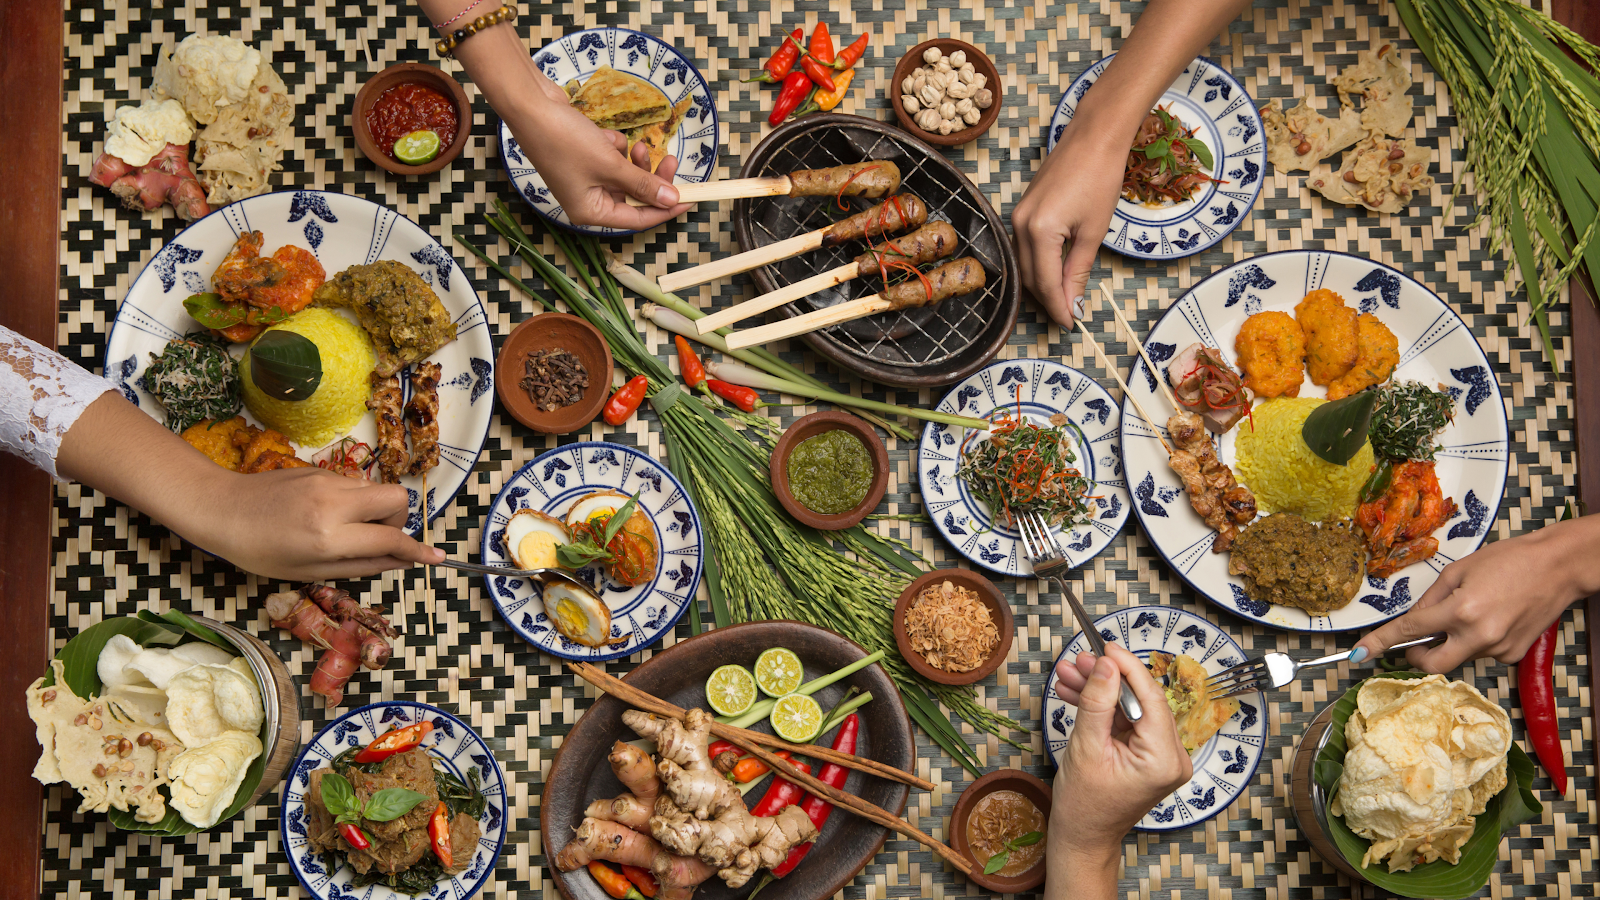 Bali offers food from all across the world. you can find any type of cuisine in any corner of this beautiful island.